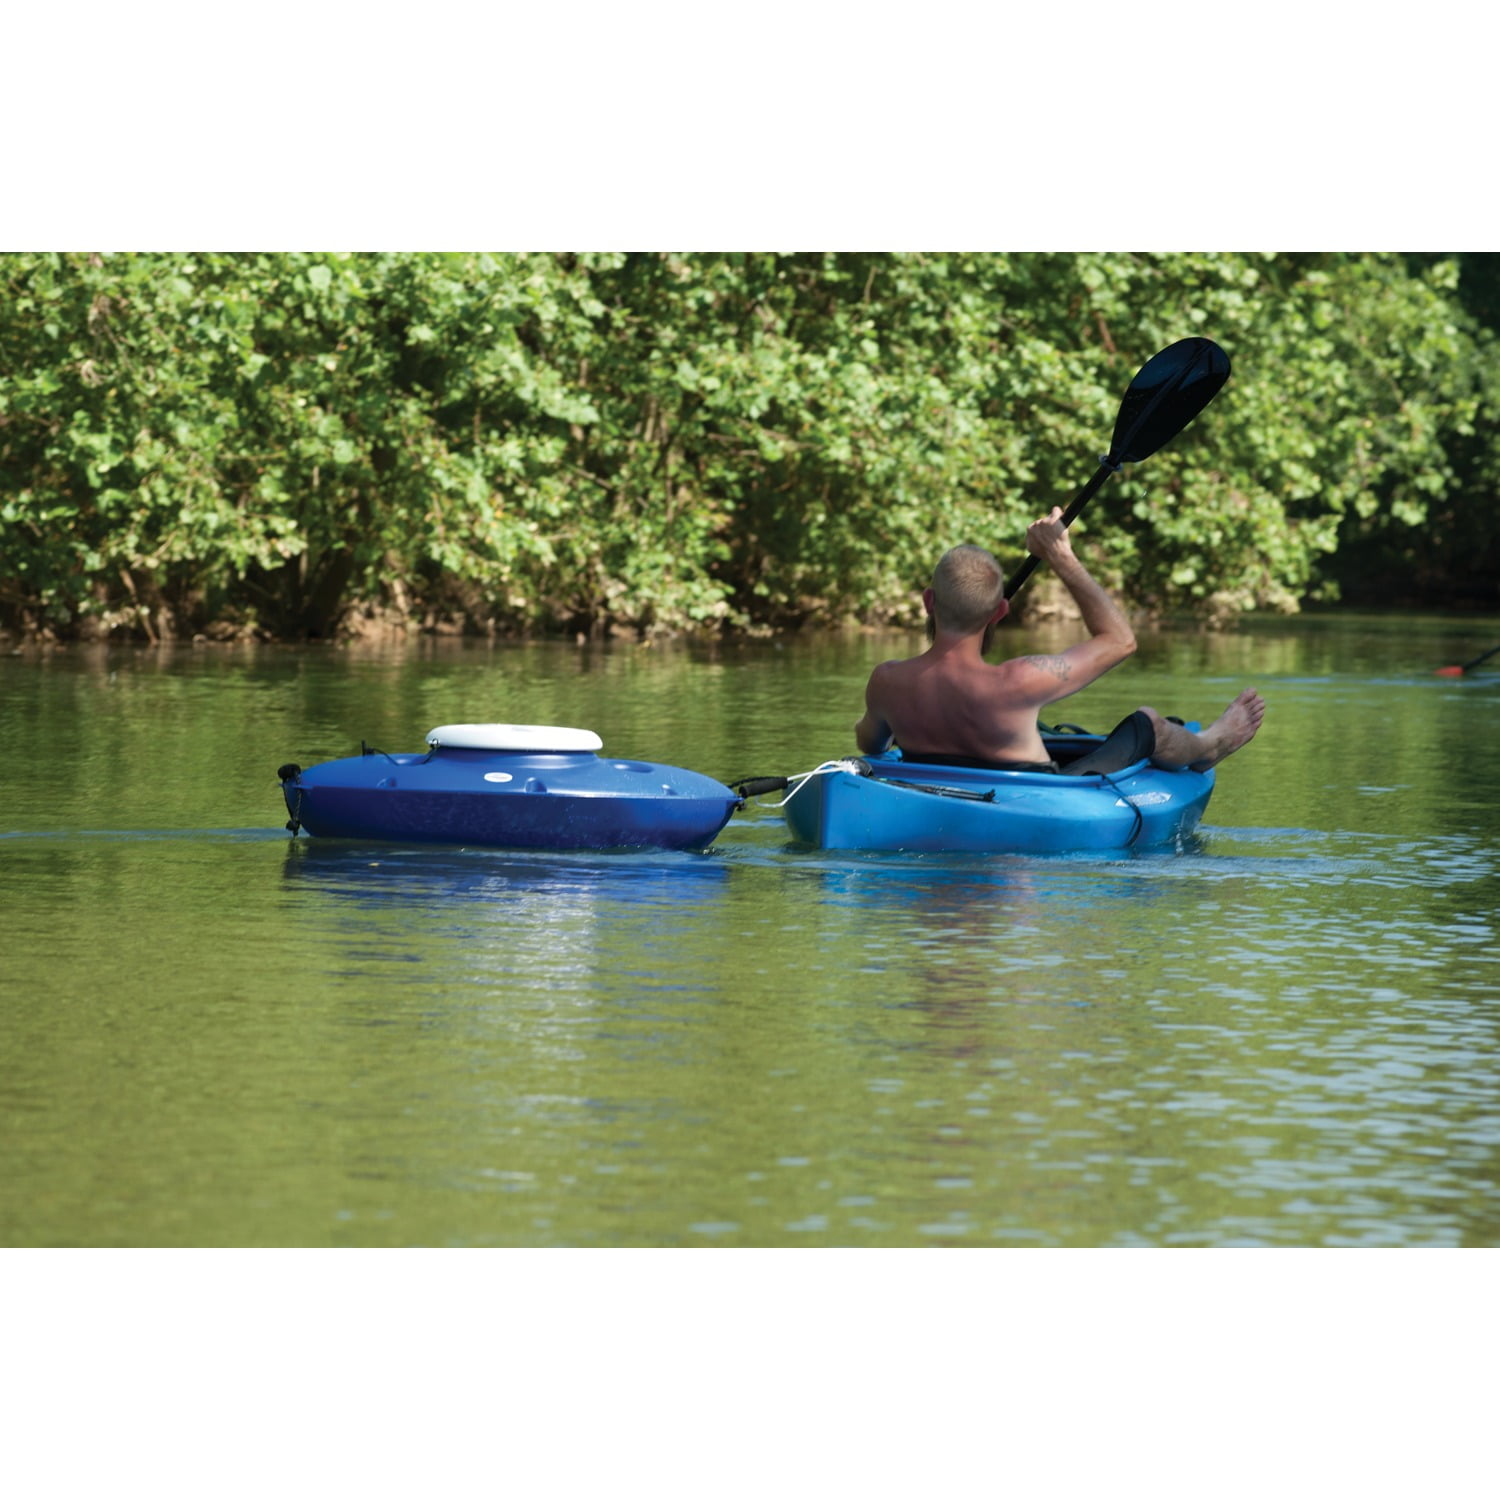 CreekKooler 30 qt. Floating Insulated Beverage Kayak White Cooler with 8  ft. Rope CK0022 + TS01601 - The Home Depot